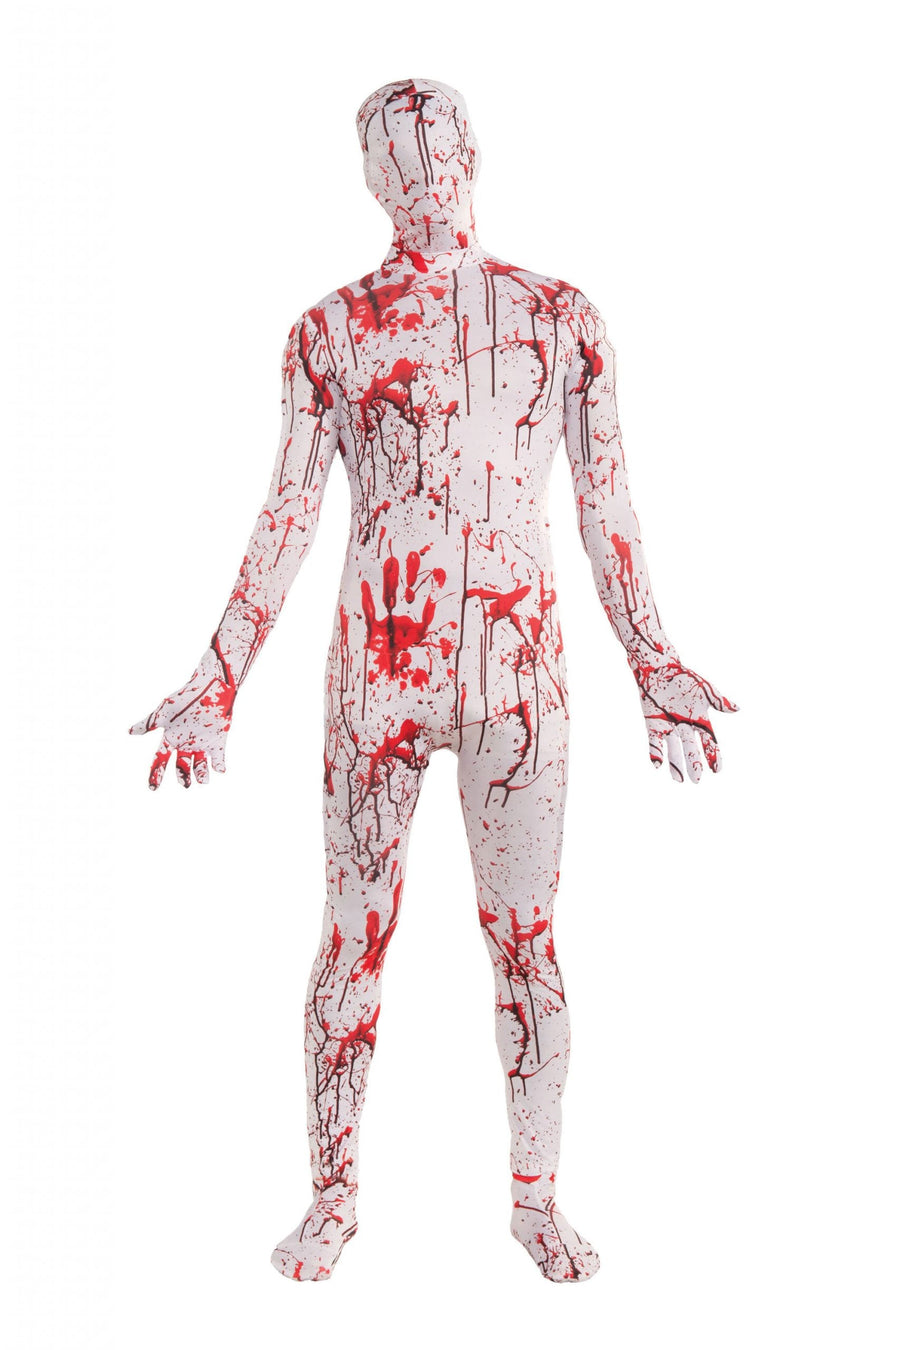 Mens Bloody Suit Disappearing Man Adult Costume Male Halloween_1